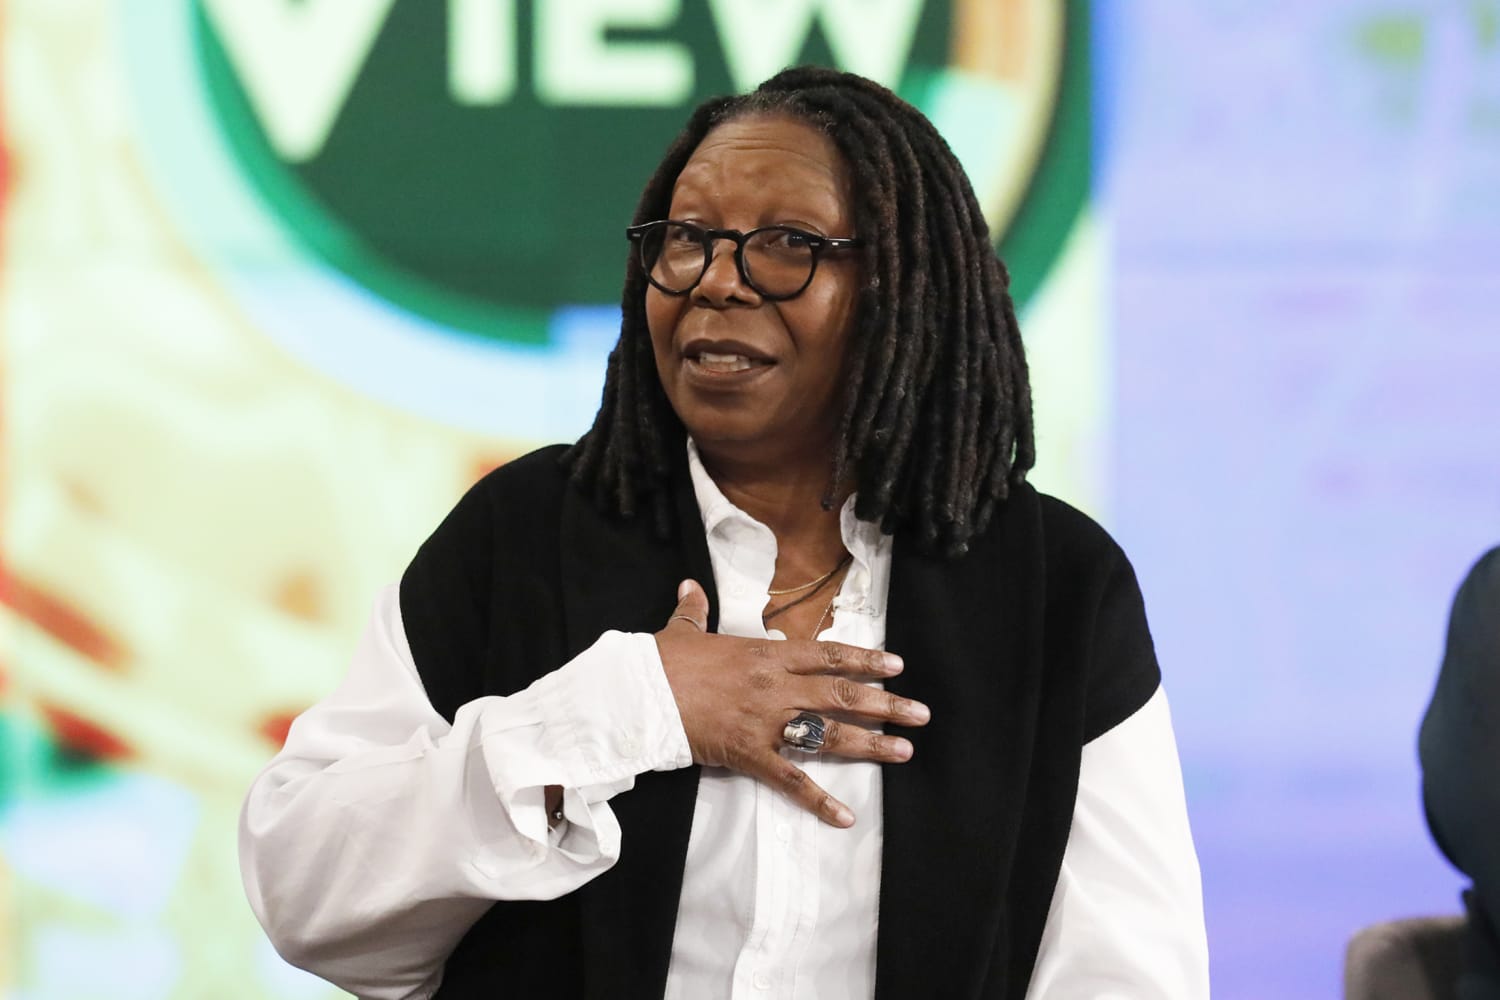 Michael Crawford Whoopi Goldberg S Suspension From The View Does Little To Solve The Problem Of Antisemitism